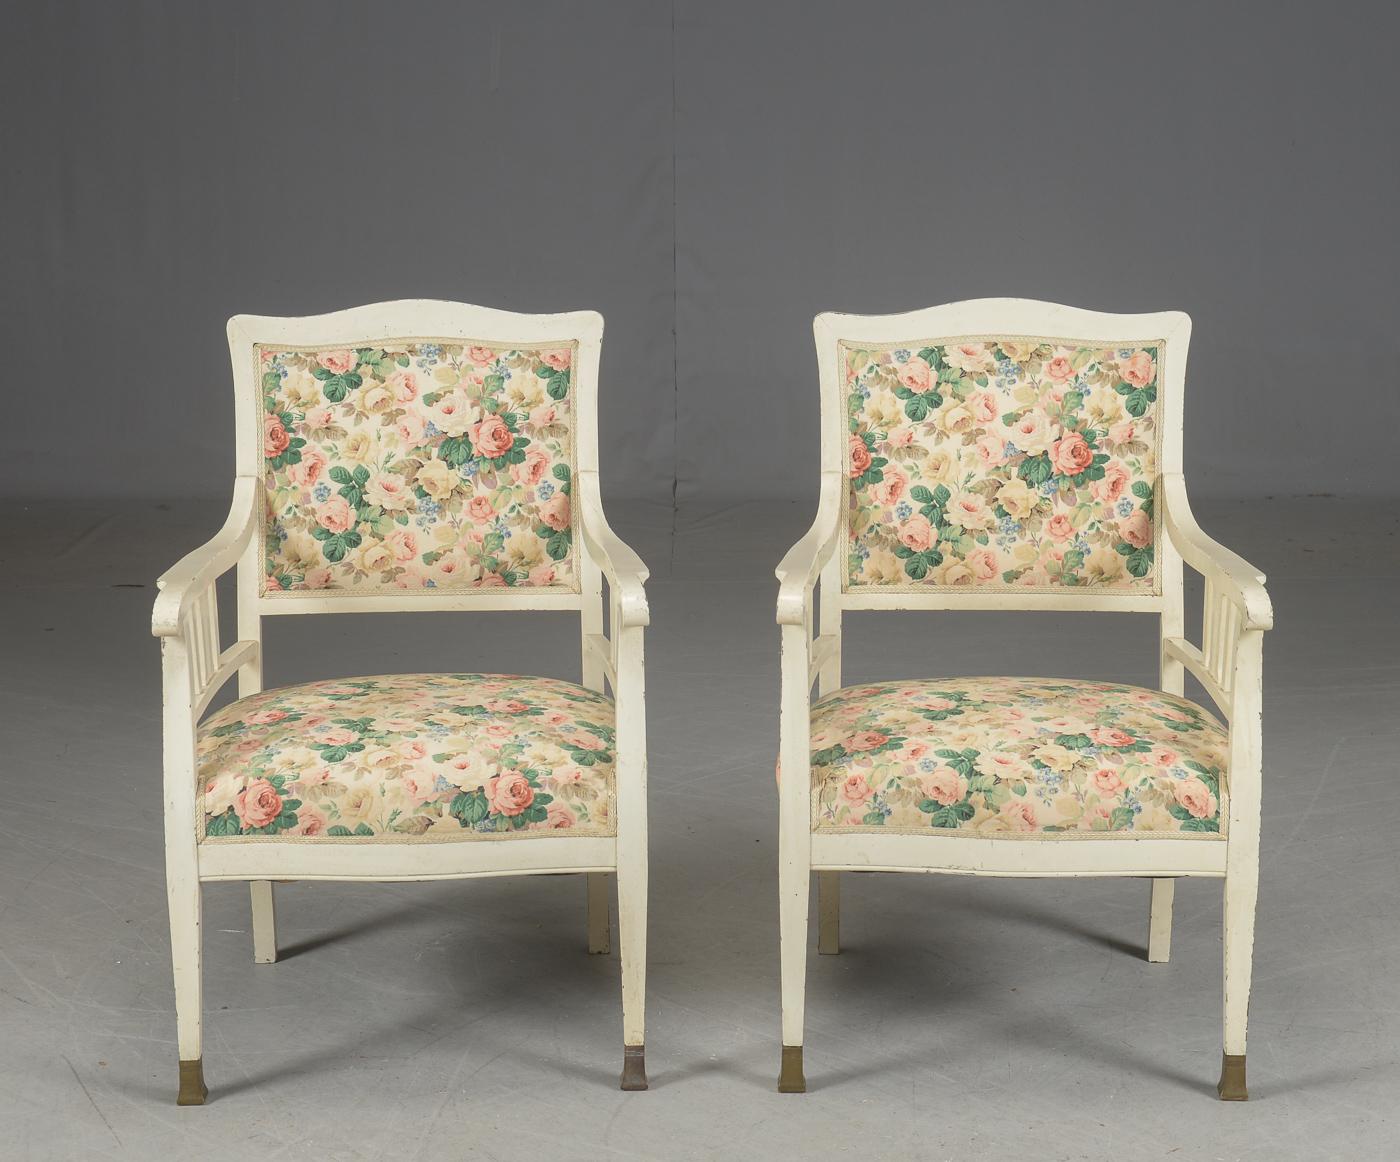 Wooden frame painted with brass food ends upholstered with flower fabric. Made in Germany in circa 1890-1900.